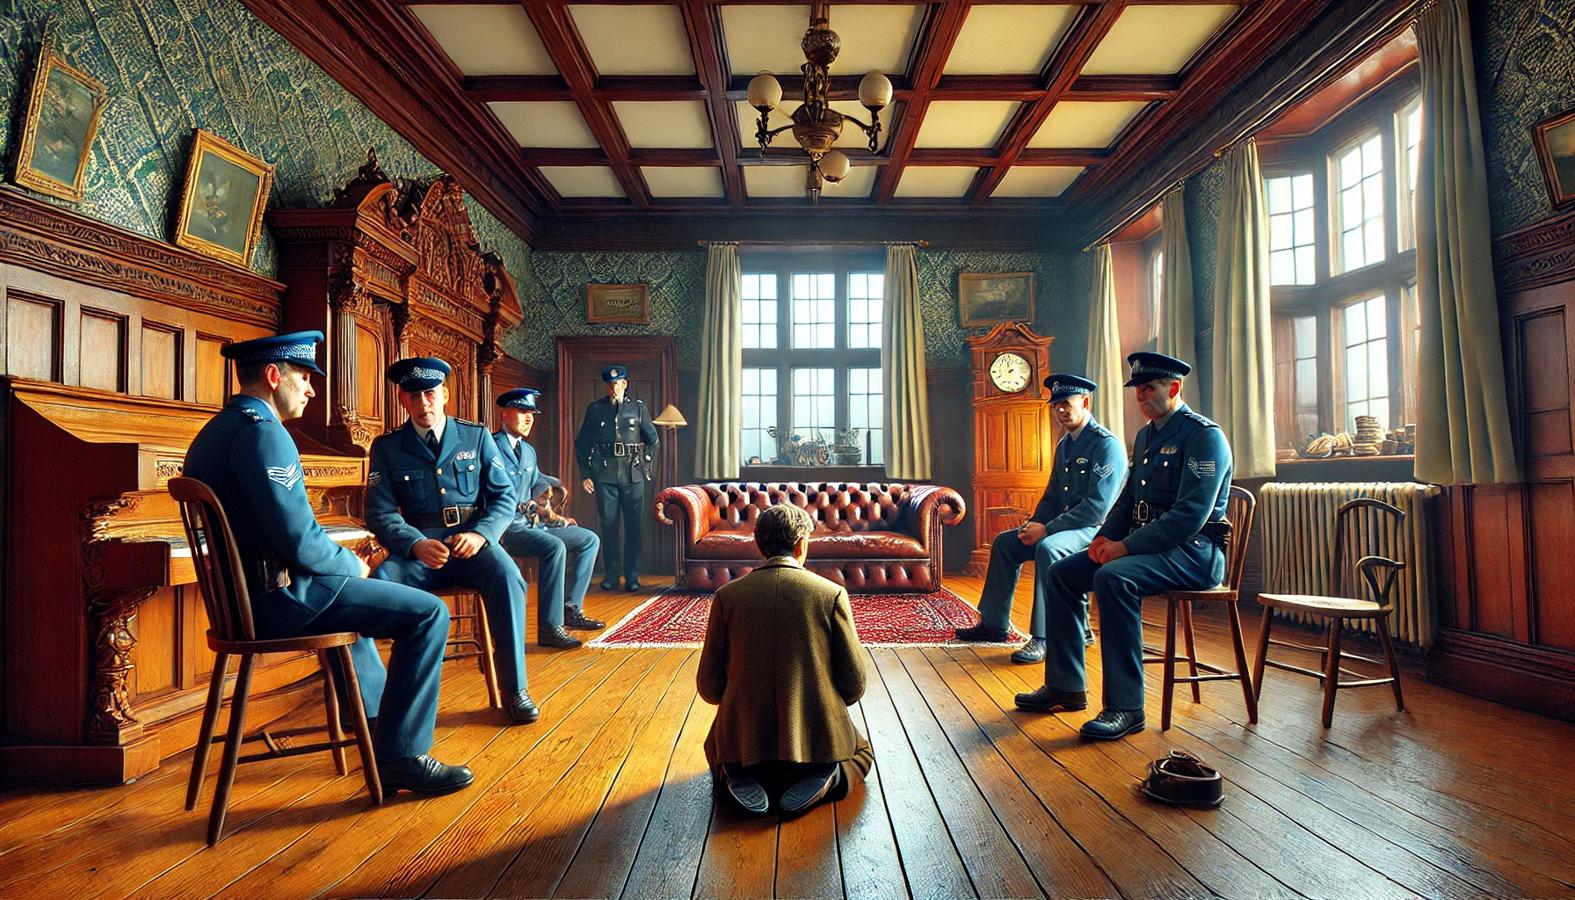 The police officers seated in the old man